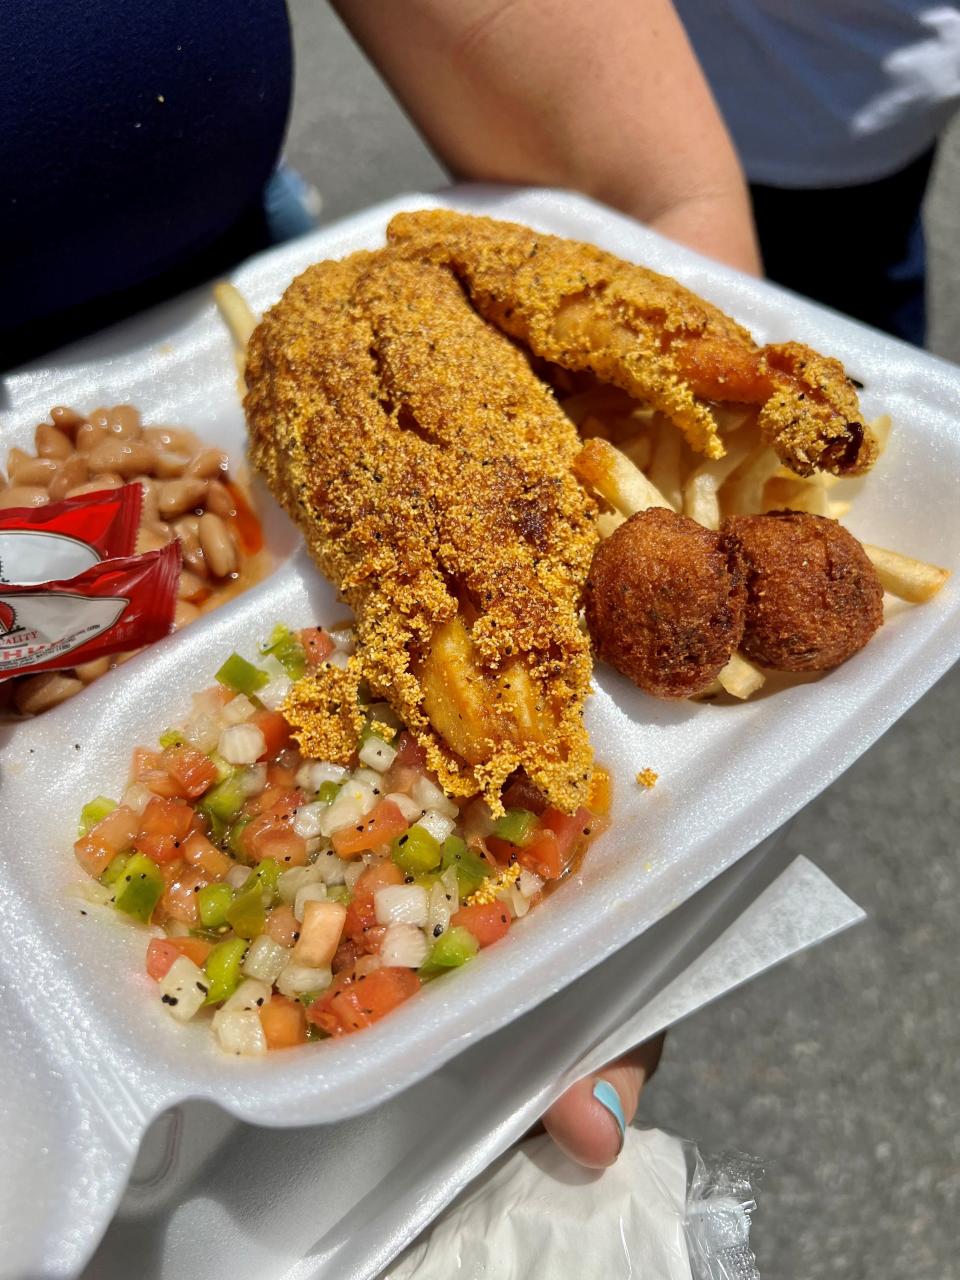 Fried fish, hush puppies, beans and French fries from Bob's Fish Fry food truck July 6 at the food truck park Street Eats weekly pop up in downtown Nashville